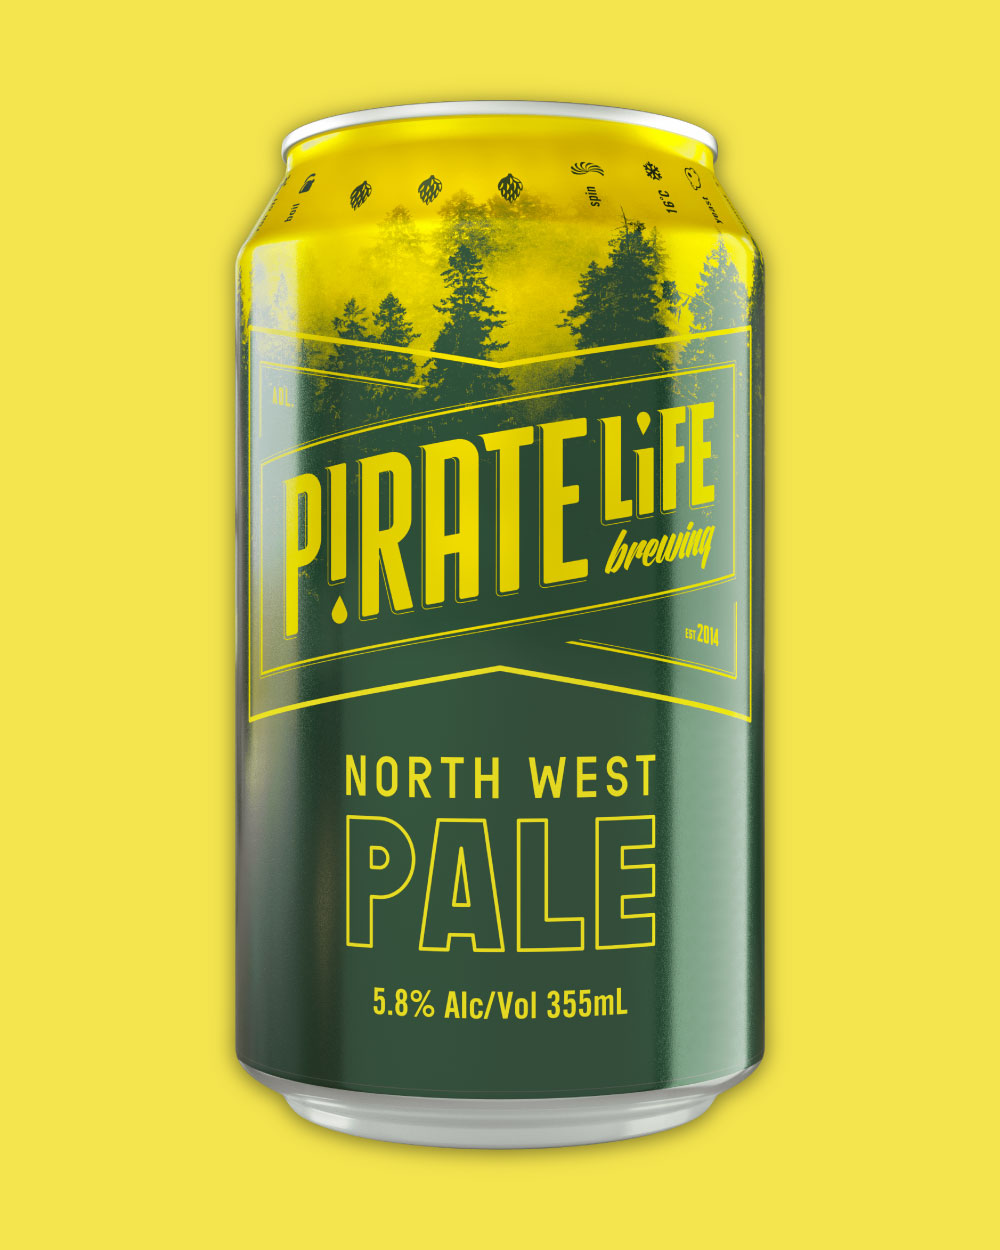 North West Pale